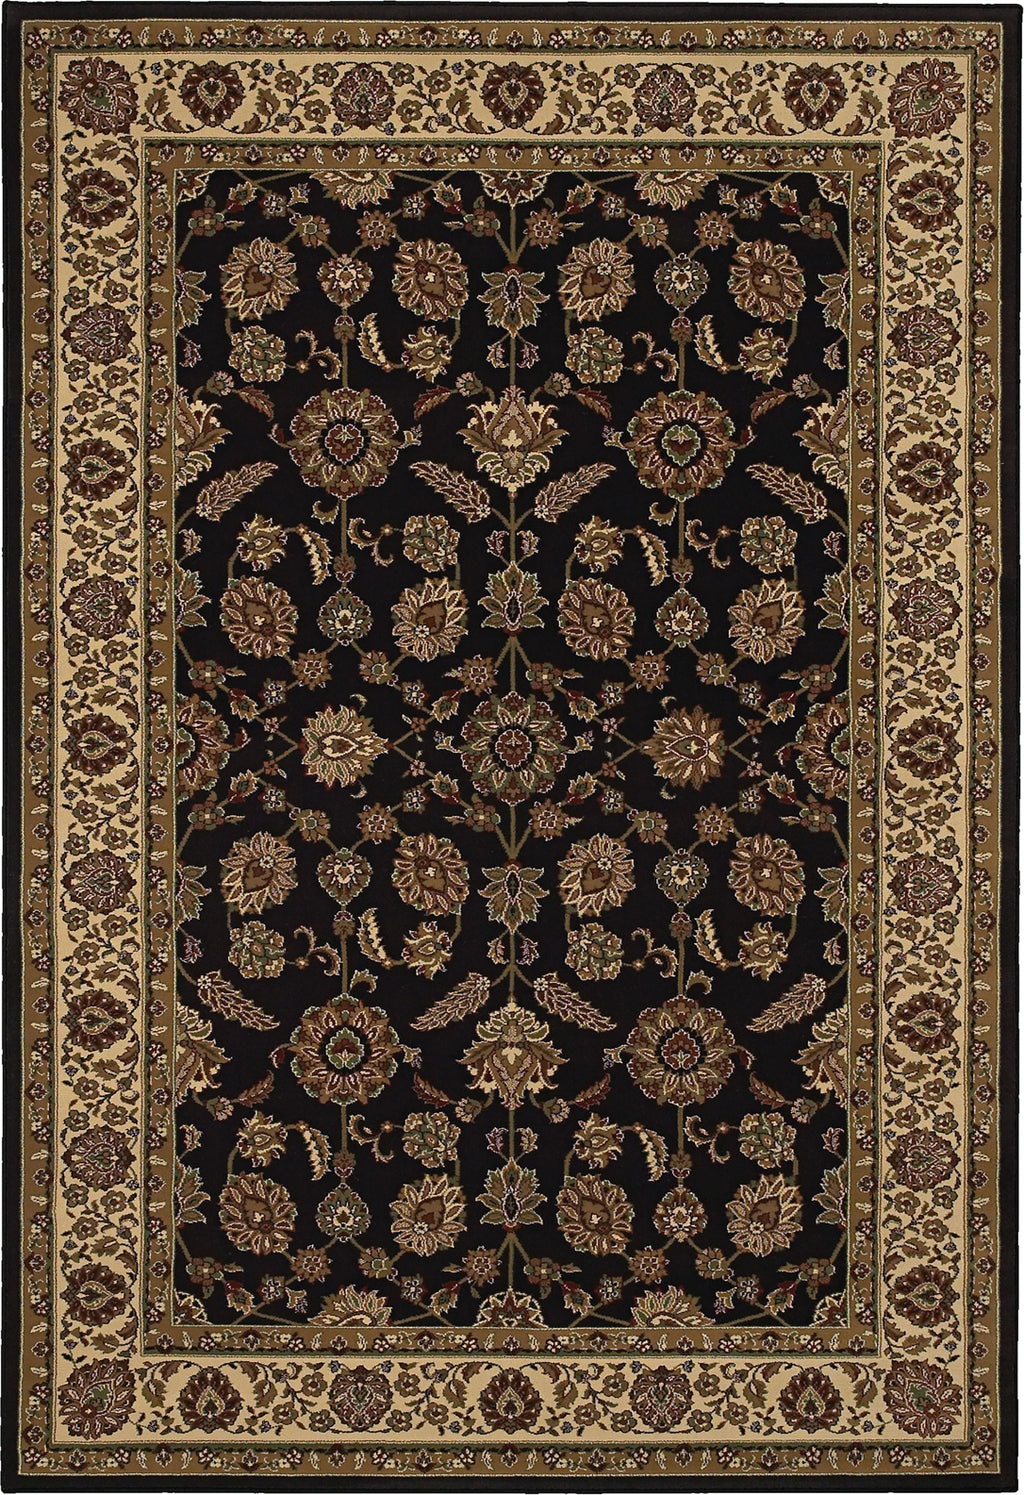 Oriental Weavers Ariana 271D3 Brown/Ivory Area Rug main image featured